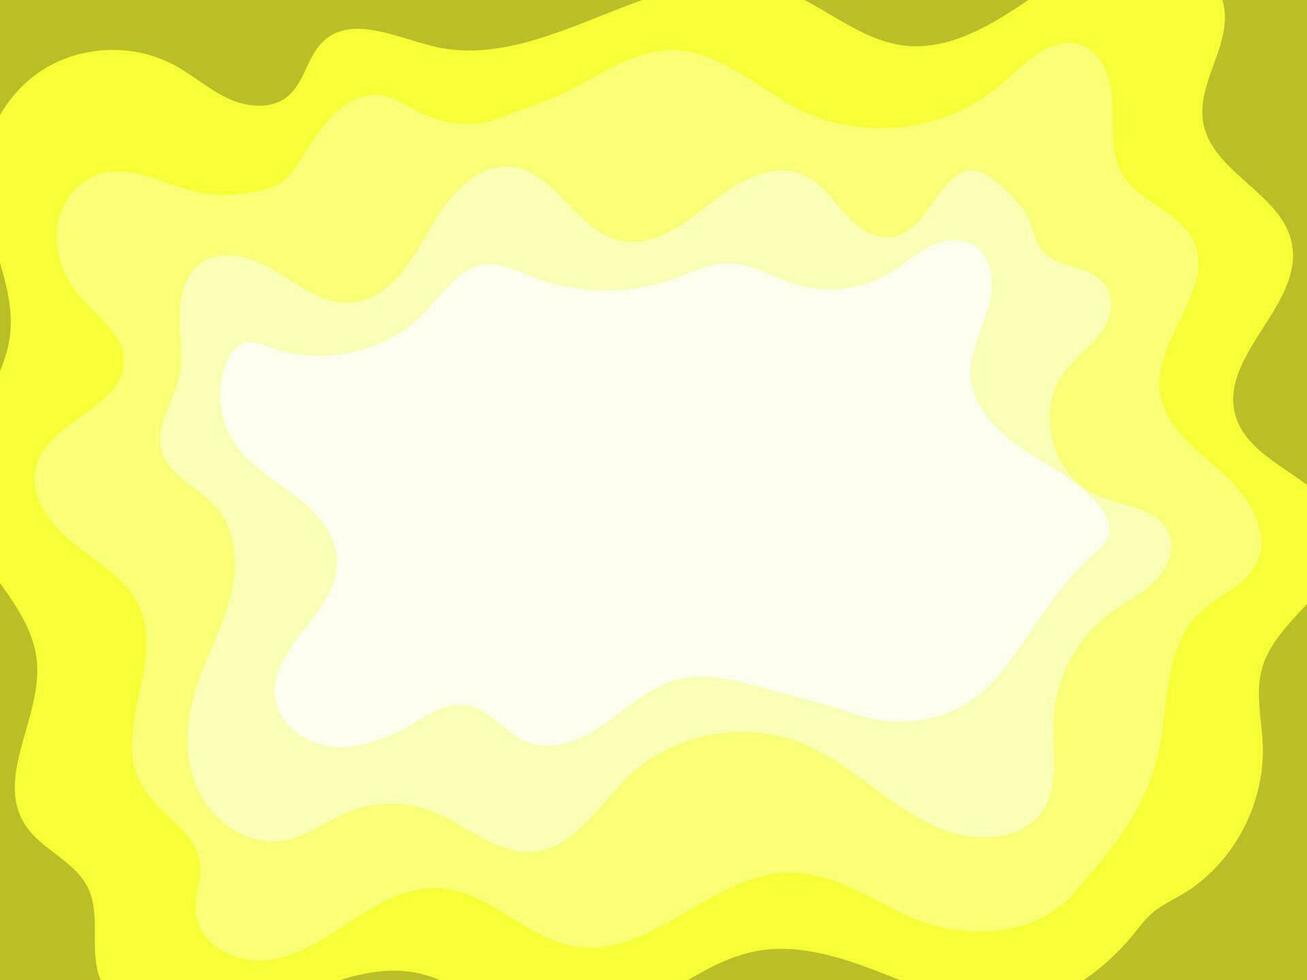 Minimalist background yellow abstract design vector